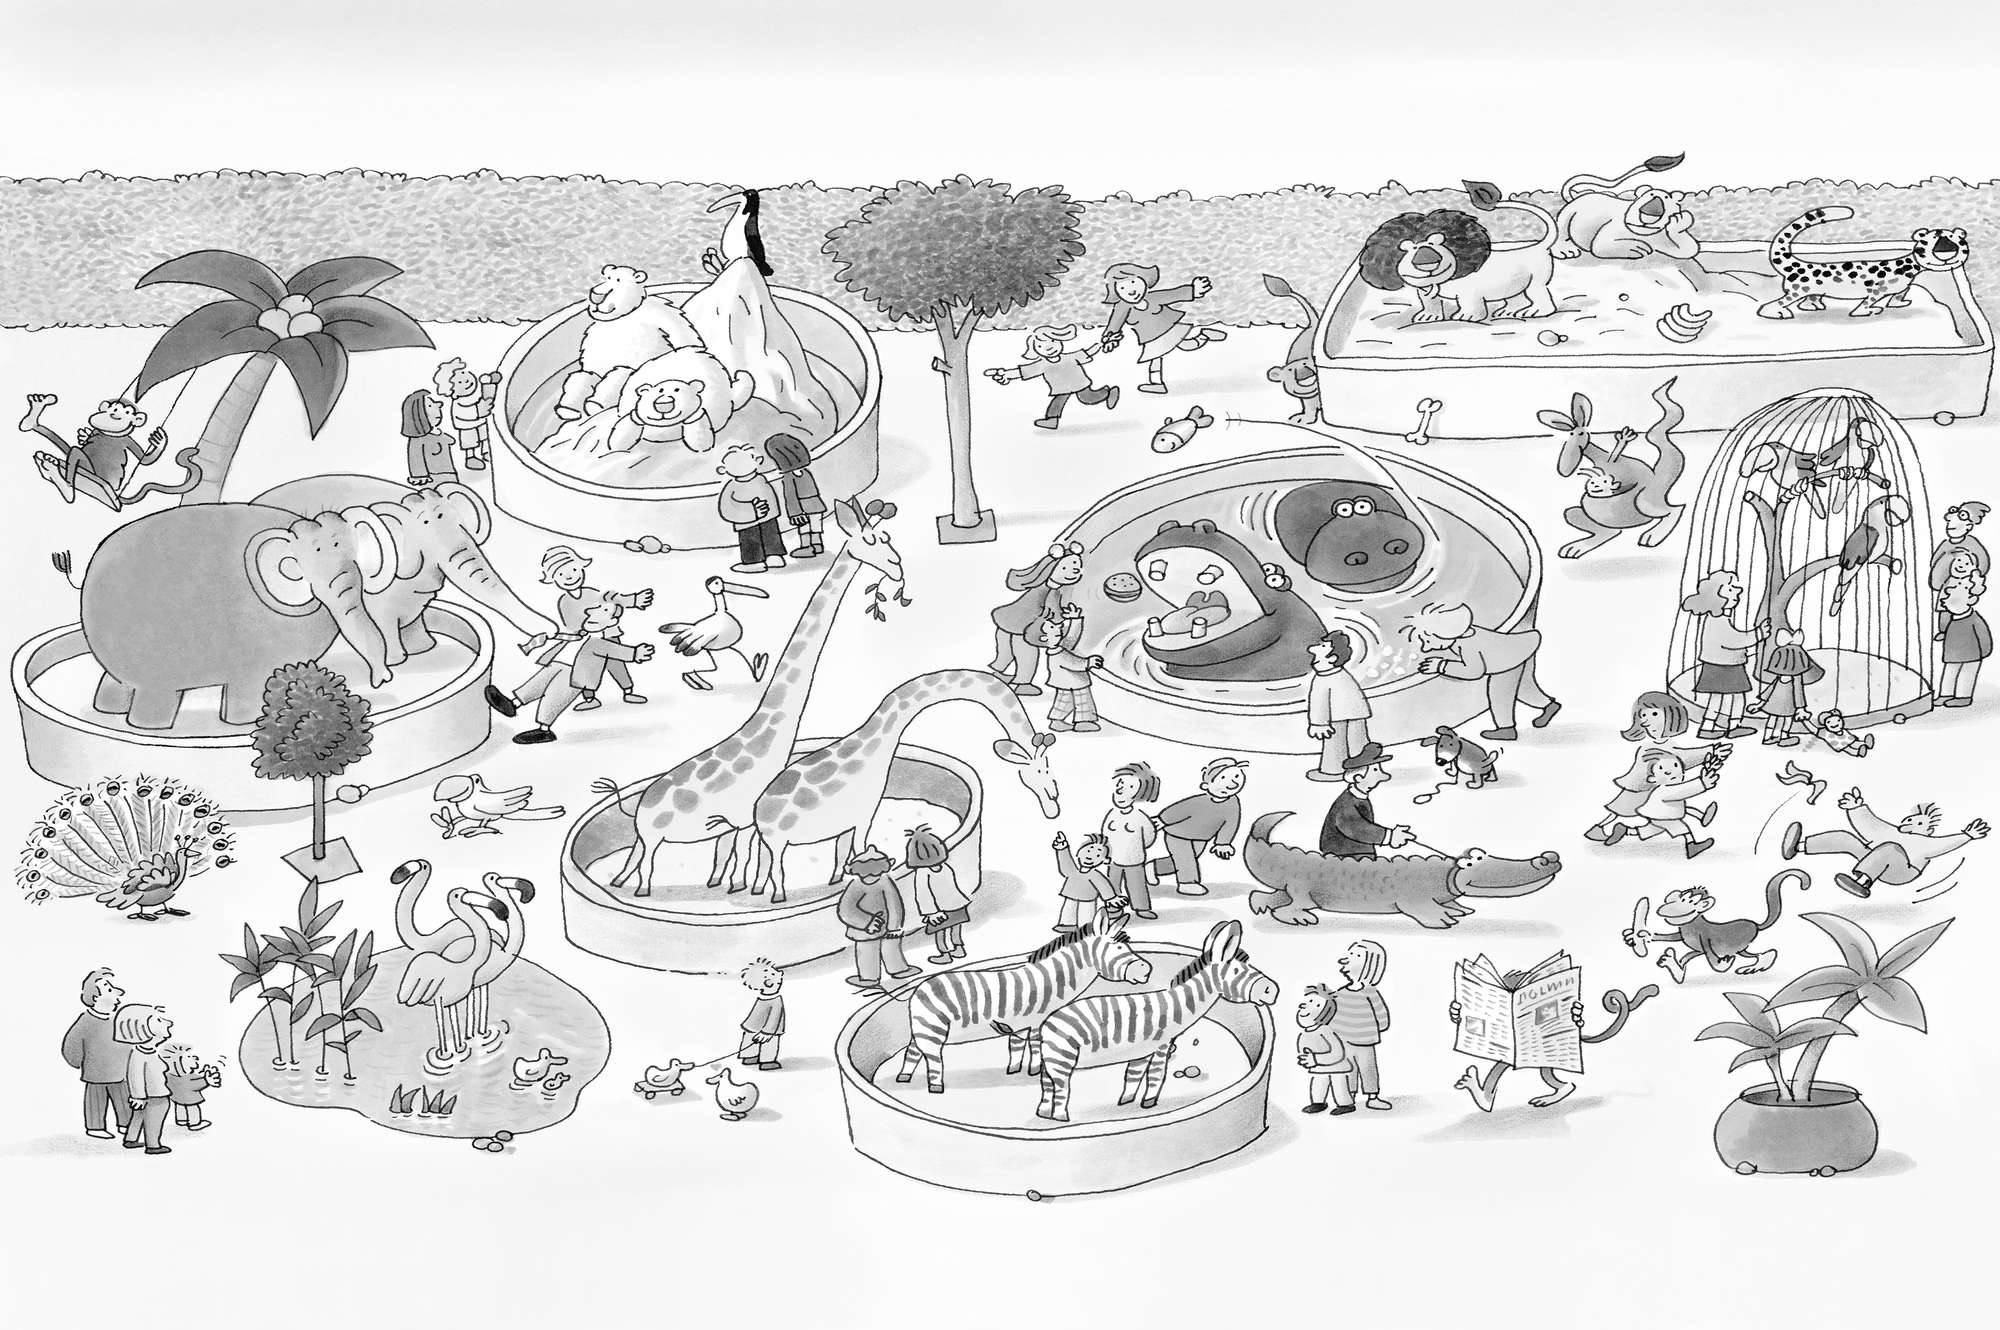             Kids mural zoo drawing in black white on mother of pearl smooth non-woven
        